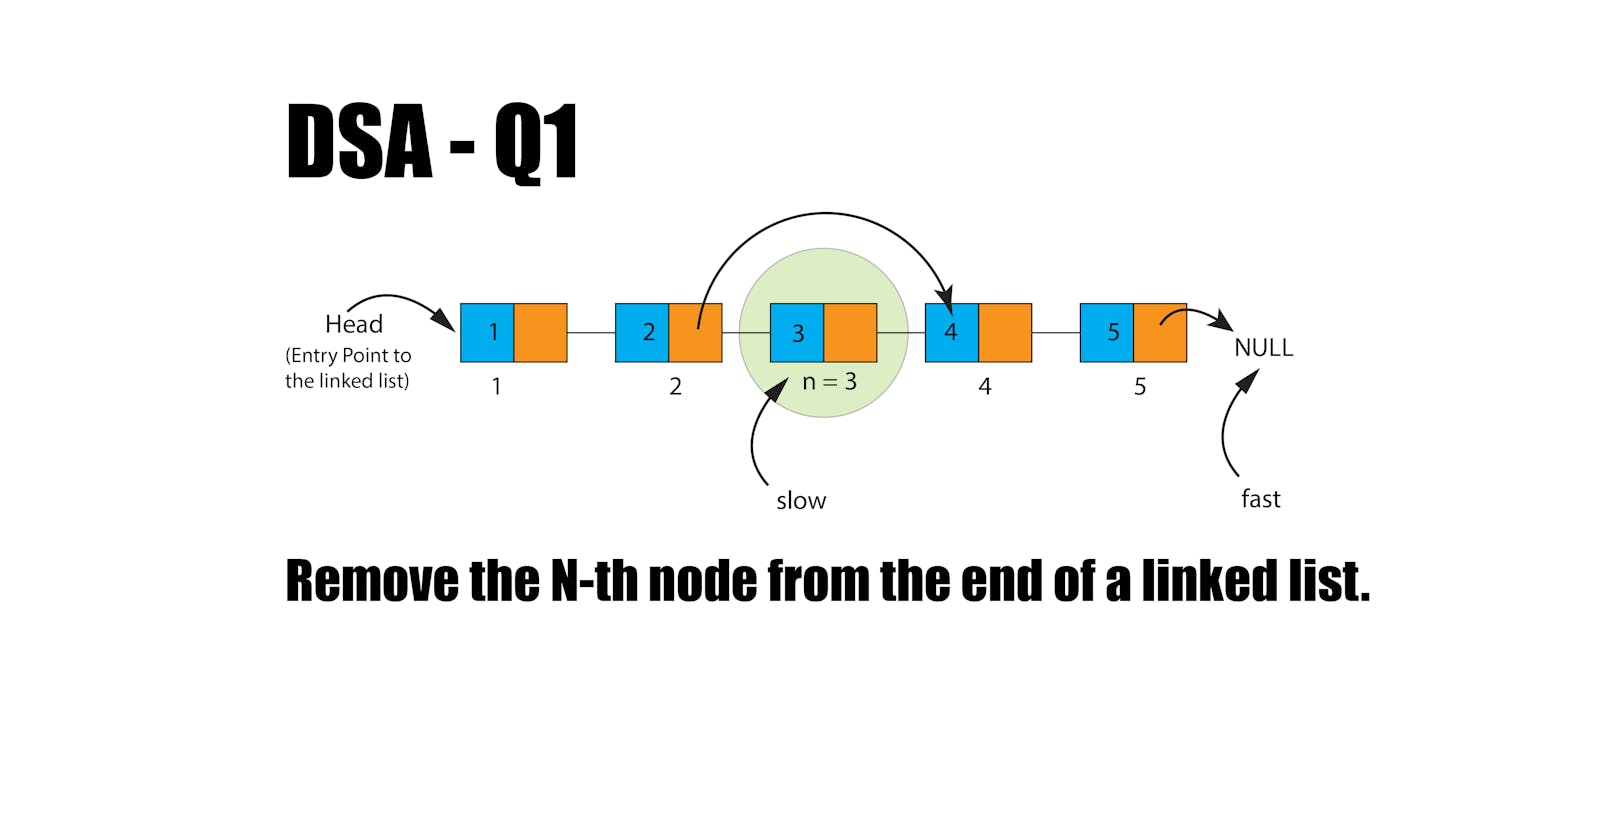 Remove the N-th node from the end of a linked list